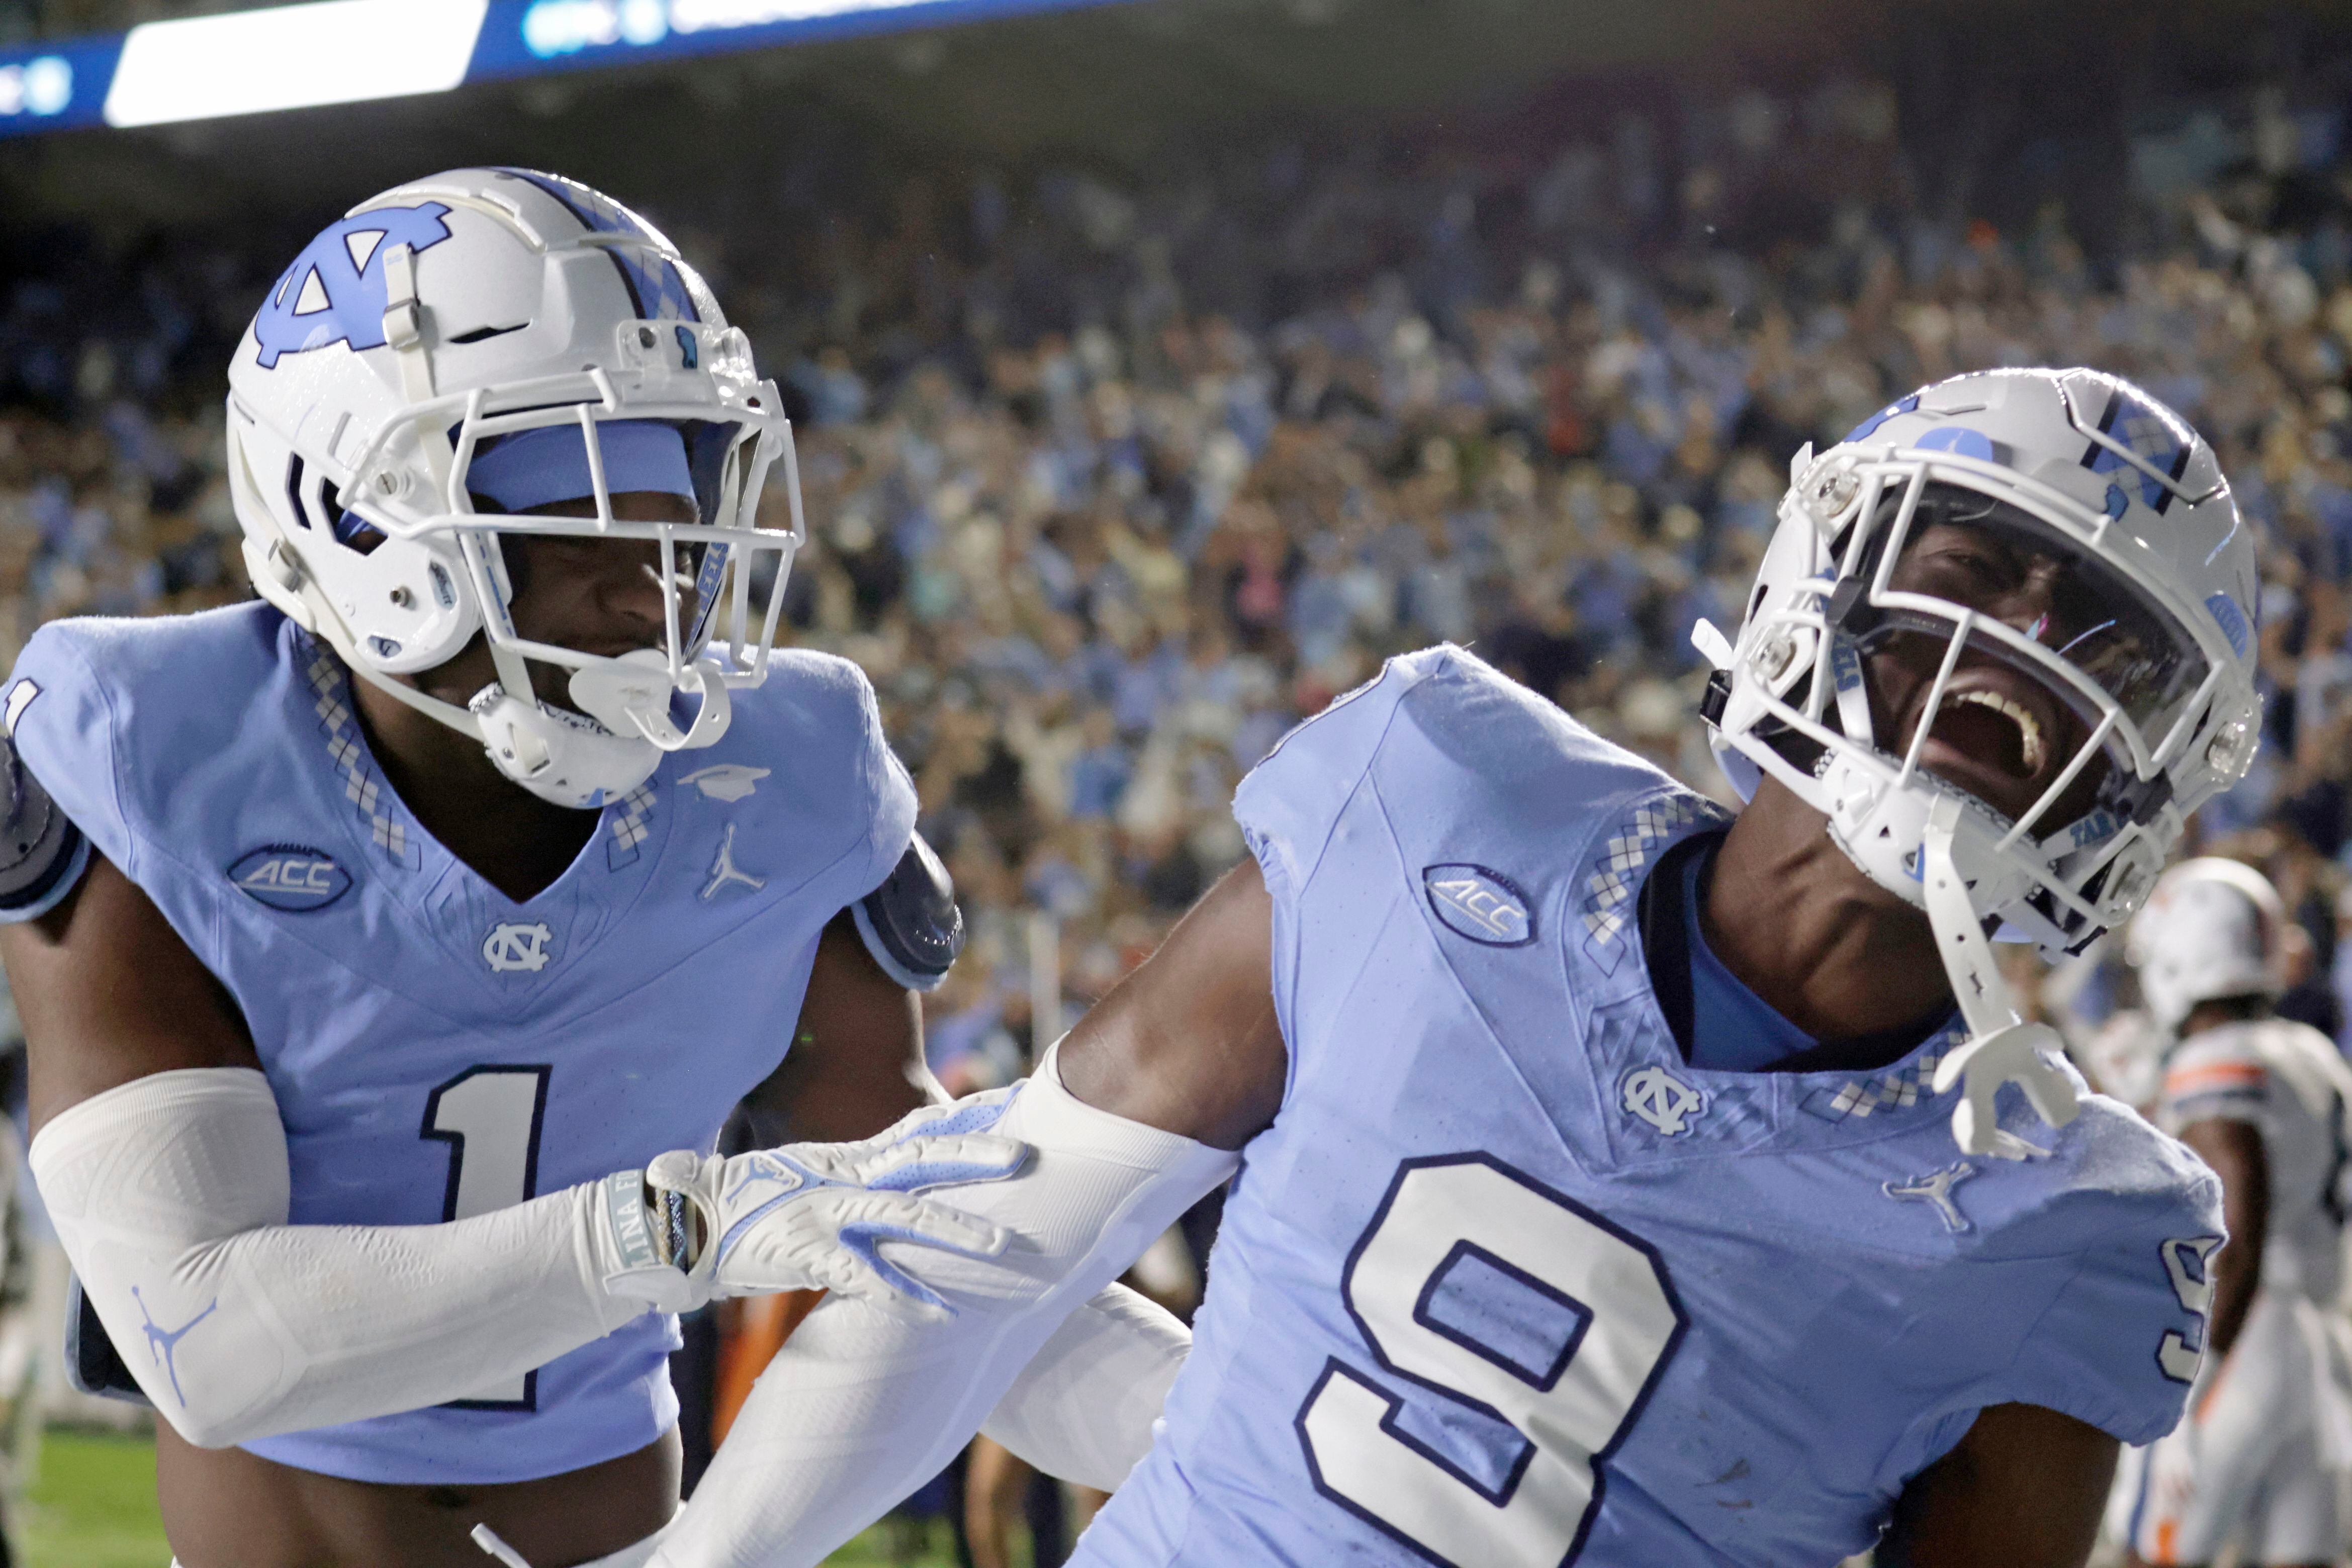 UNC football gets rocked with questionable eligibility ruling on Tez Walker